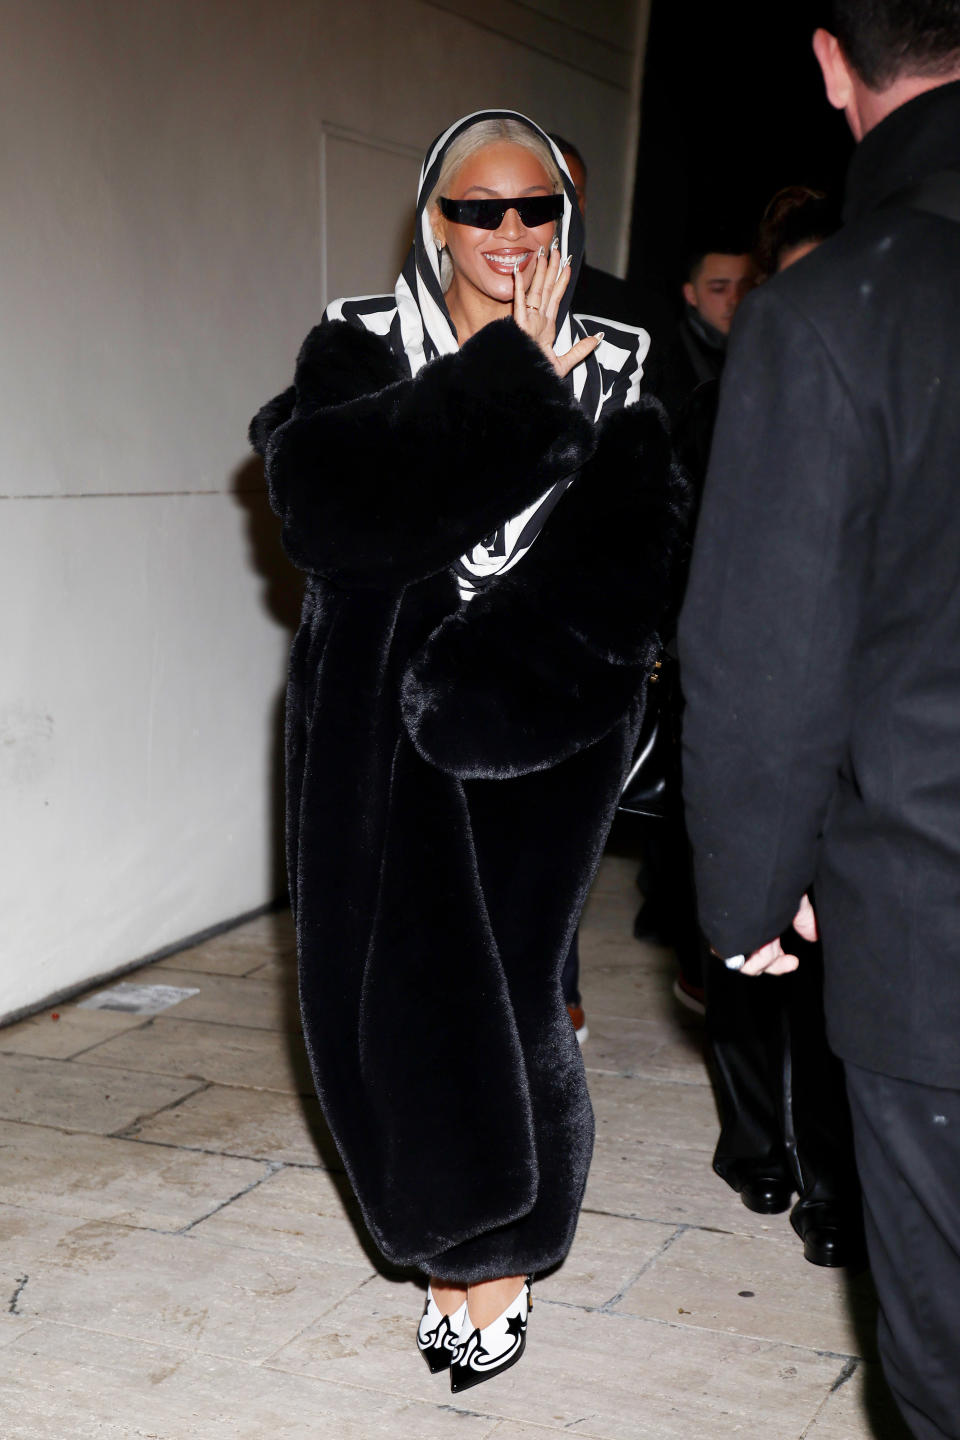 NEW YORK, NY - FEBRUARY 15: Beyonce is seen leaving the "Mea Culpa" screening at on February 15, 2024 in New York, New York. (Photo by MEGA/GC Images)